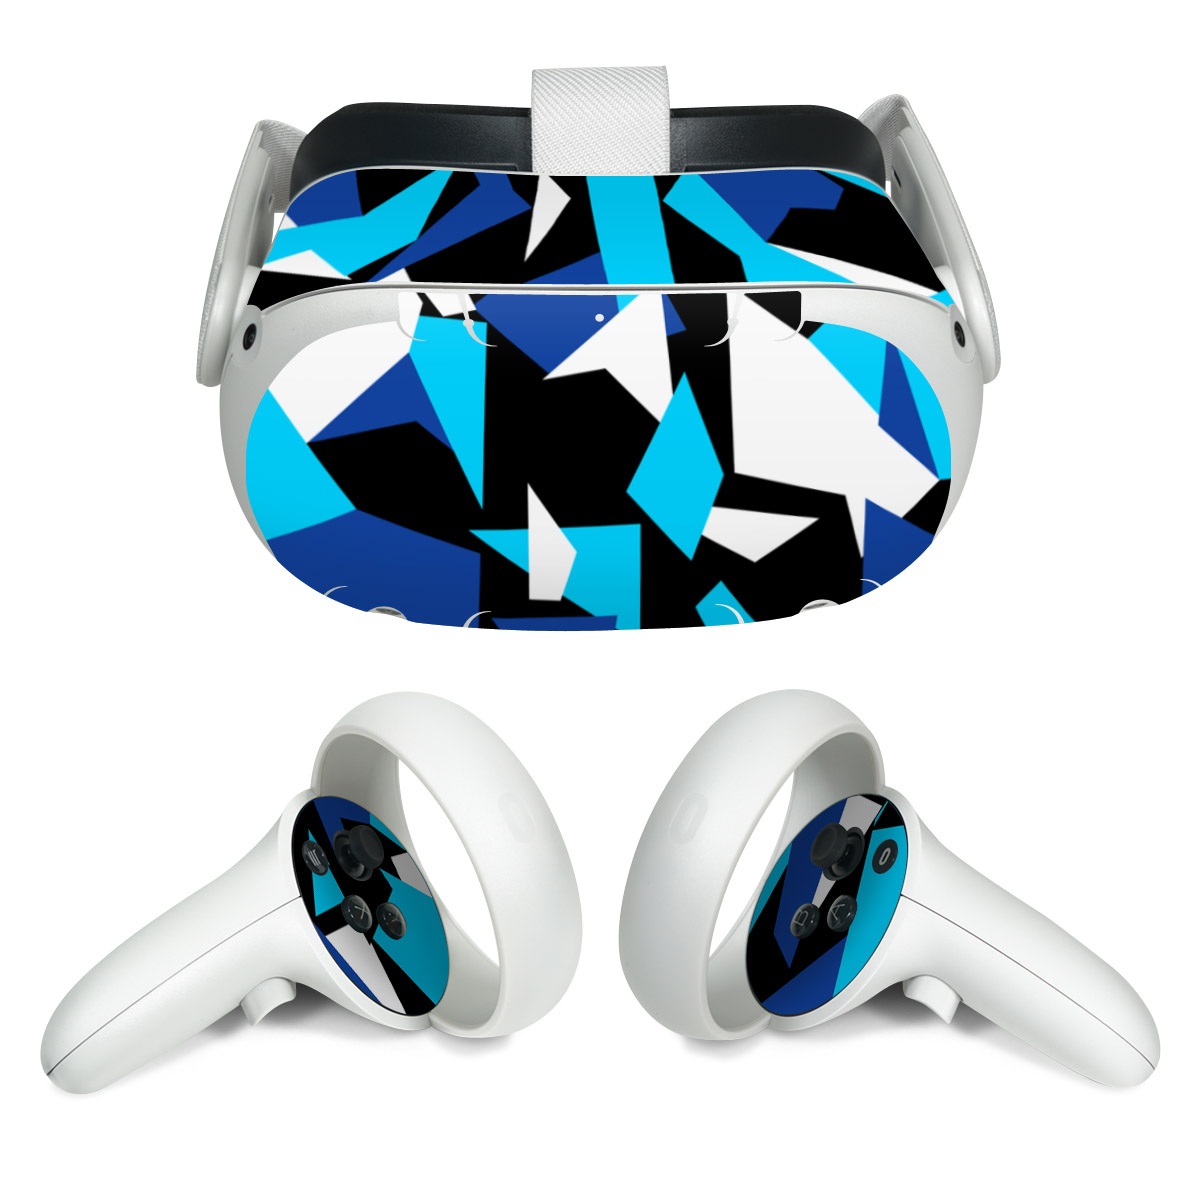 Meta Quest 2 Skin design of Blue, Pattern, Turquoise, Cobalt blue, Teal, Design, Electric blue, Graphic design, Triangle, Font, with blue, white, black colors